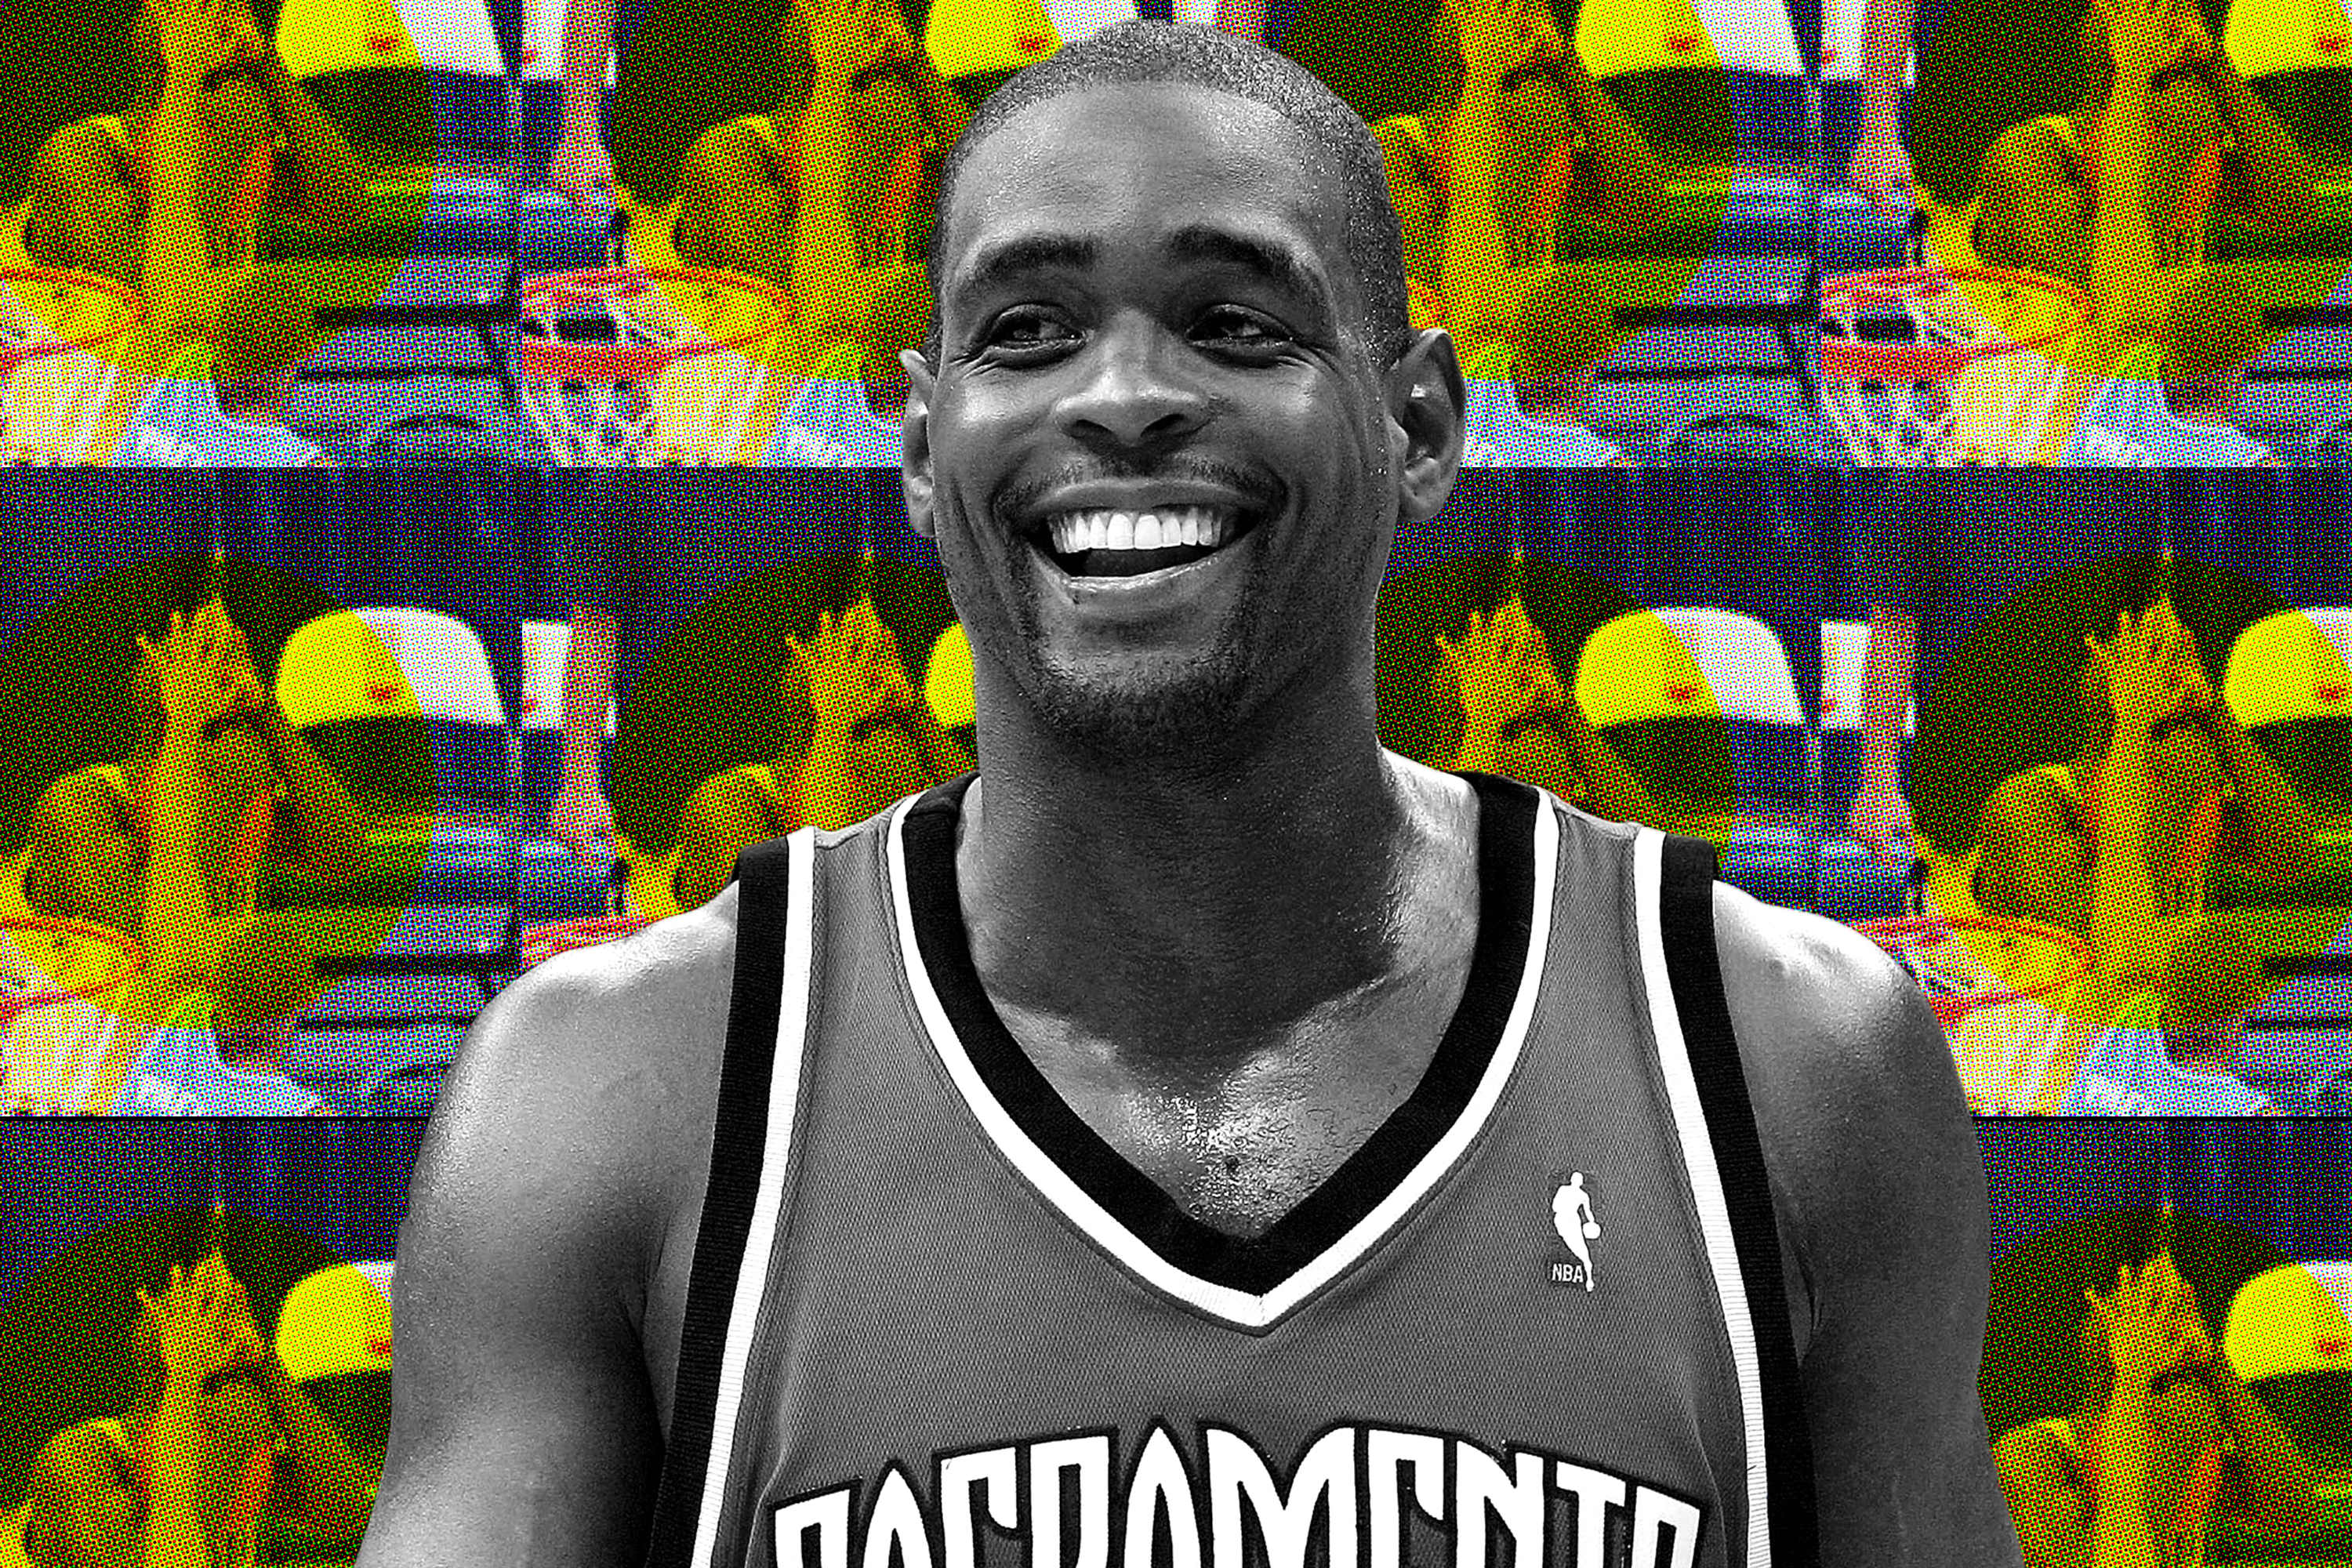 25 Years After the Timeout, How Should We Remember Chris Webber